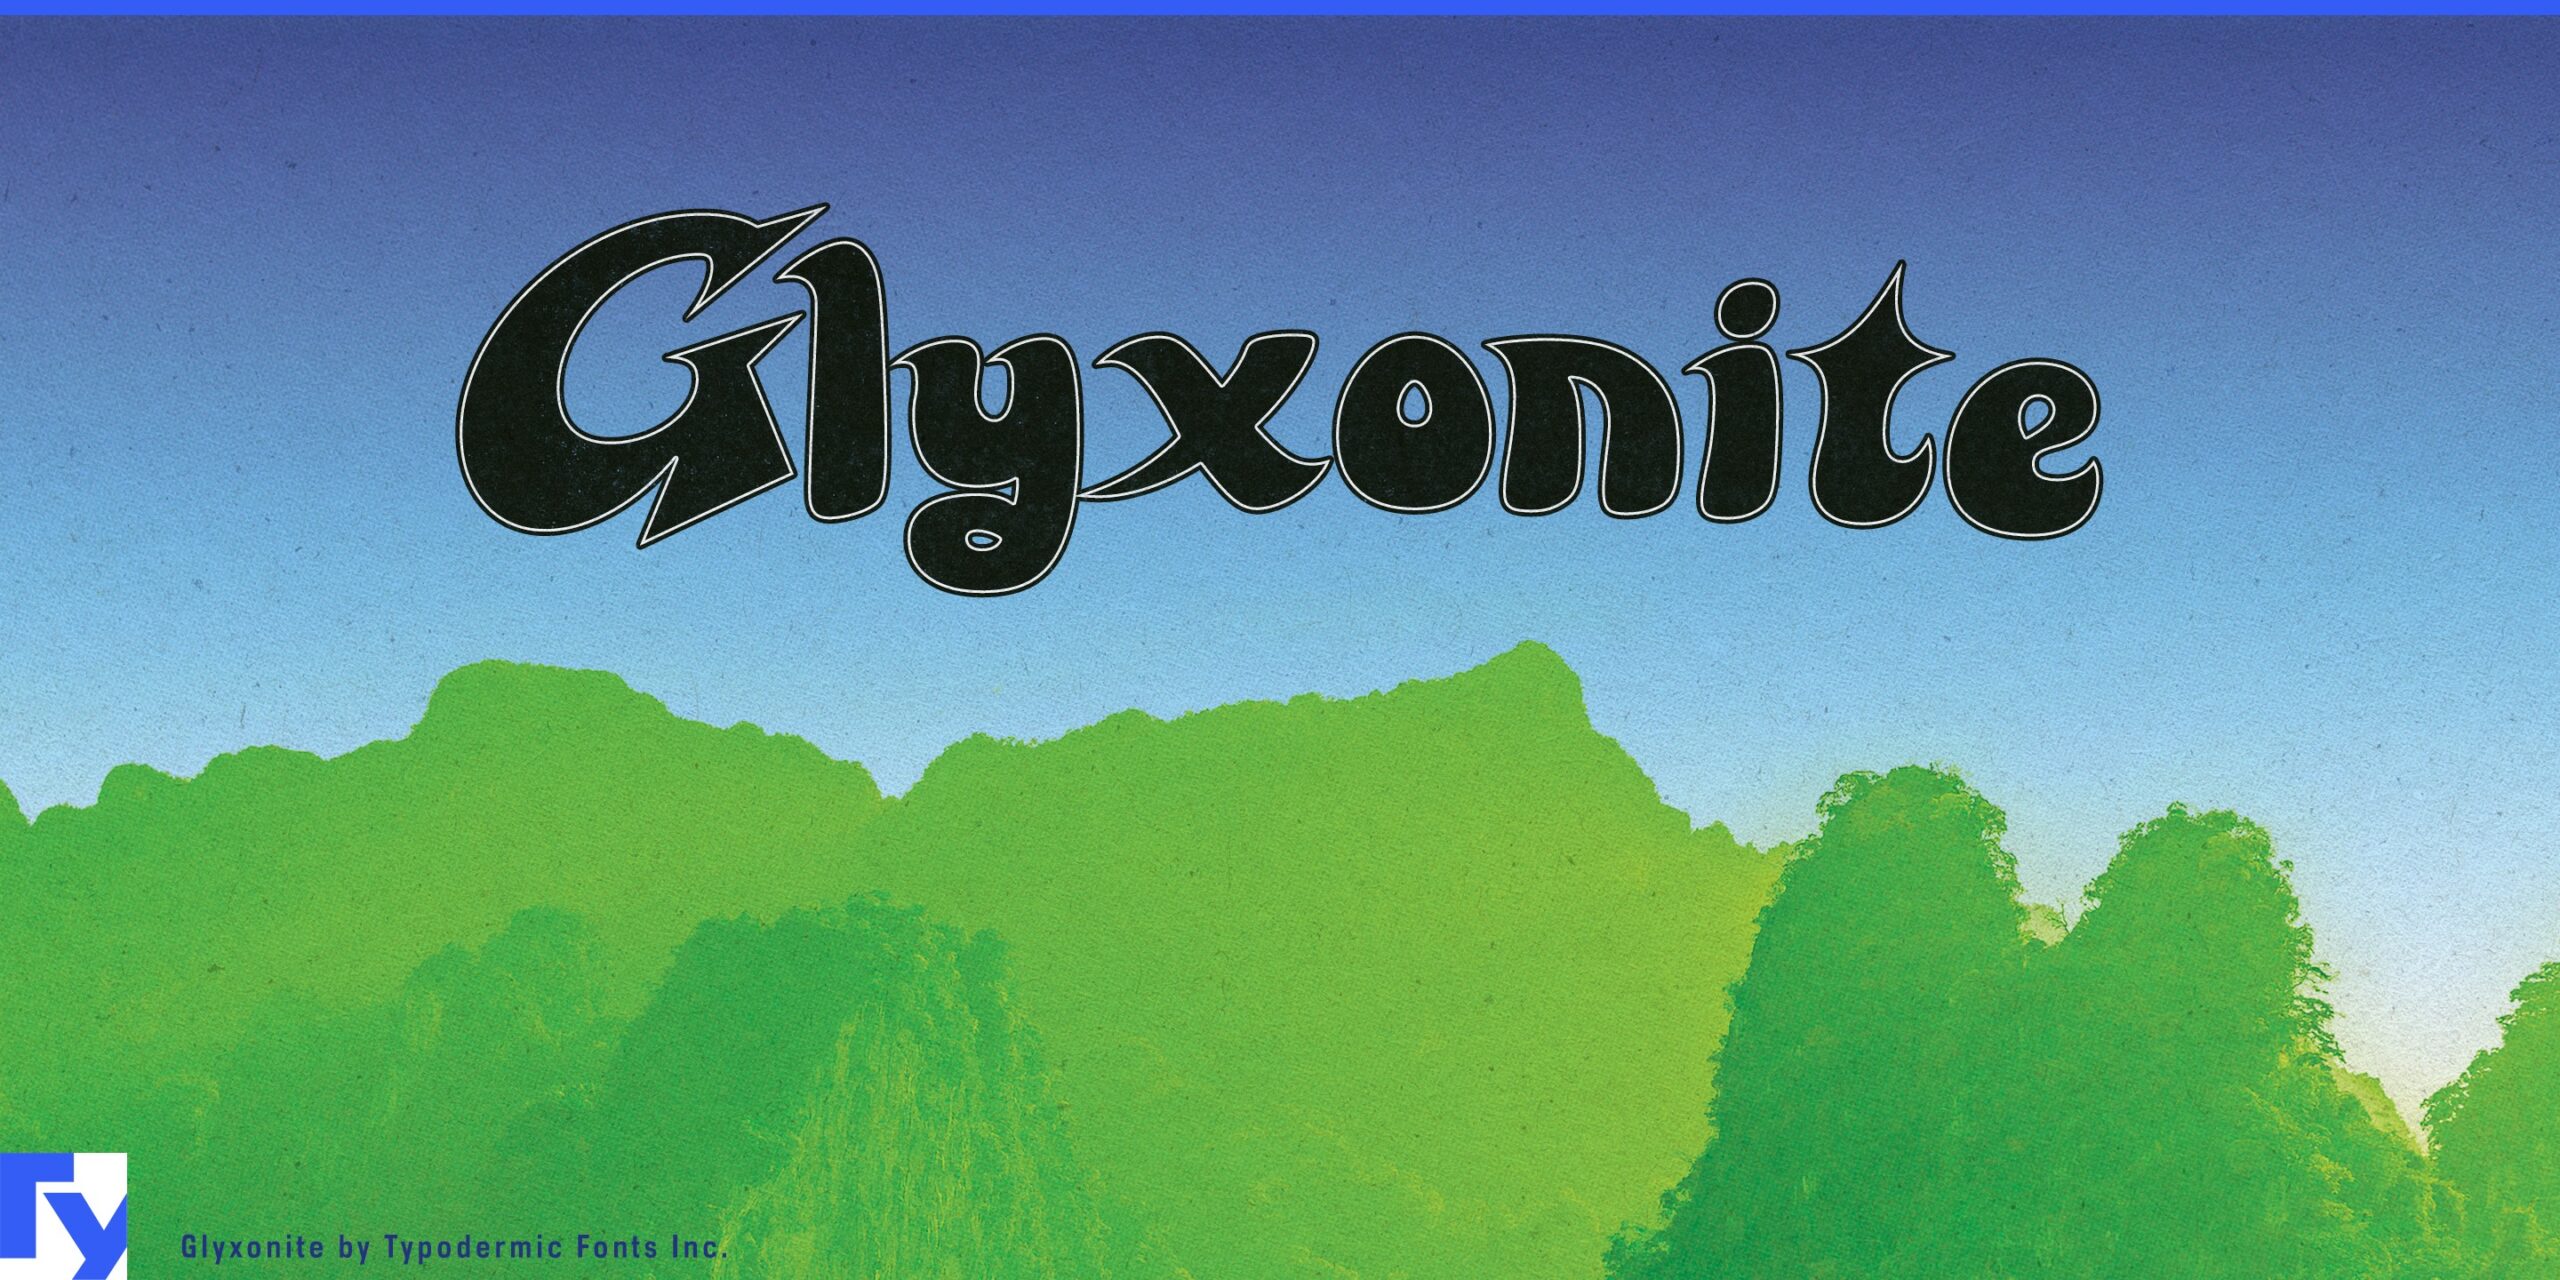 Cosmic Journey in Words: Create Your Universe with Glyxonite Typeface